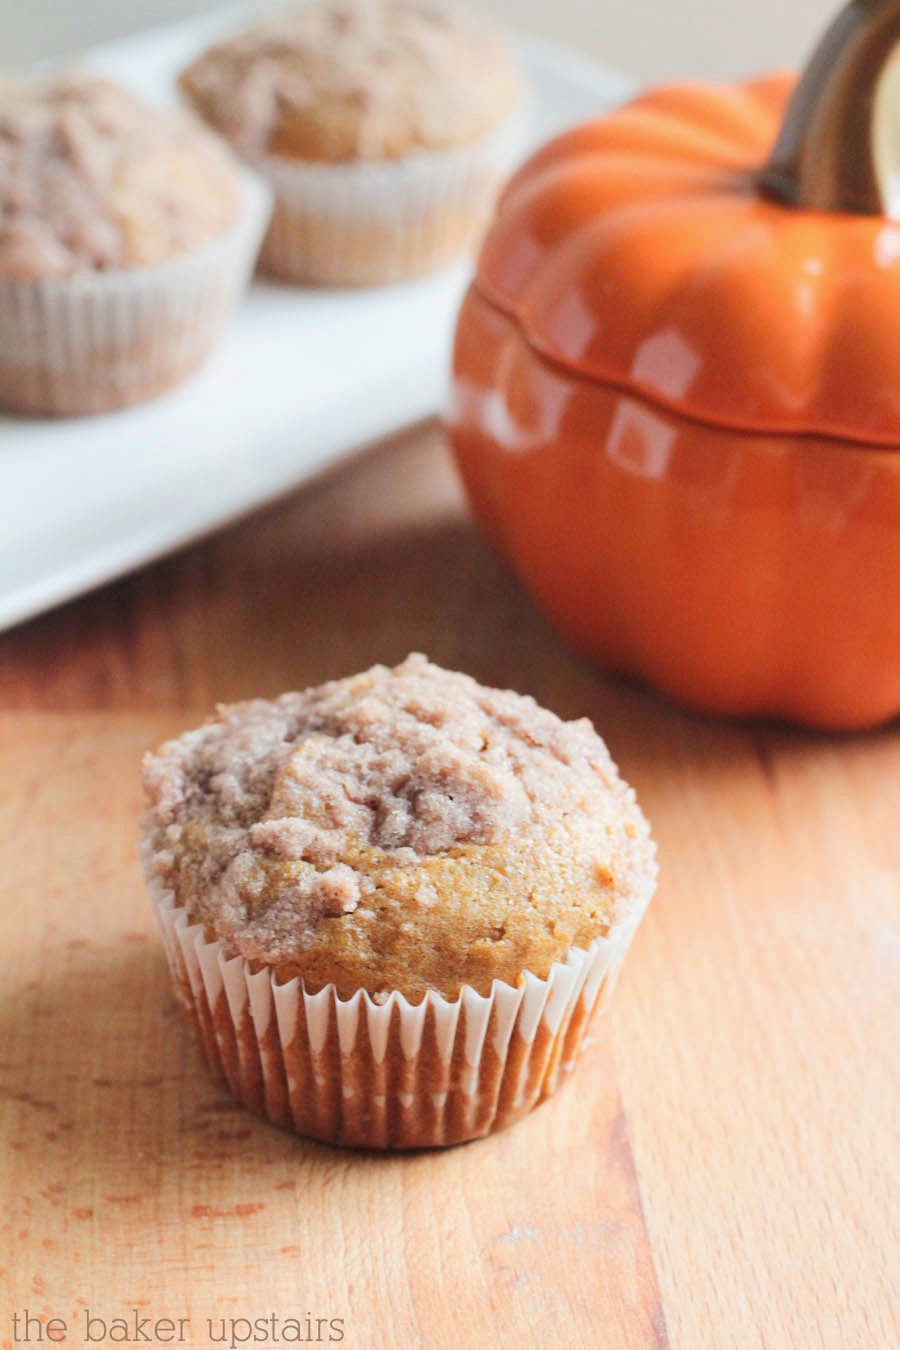 These pumpkin cream cheese muffins are just layer upon layer of awesomeness. They are a must try this fall!